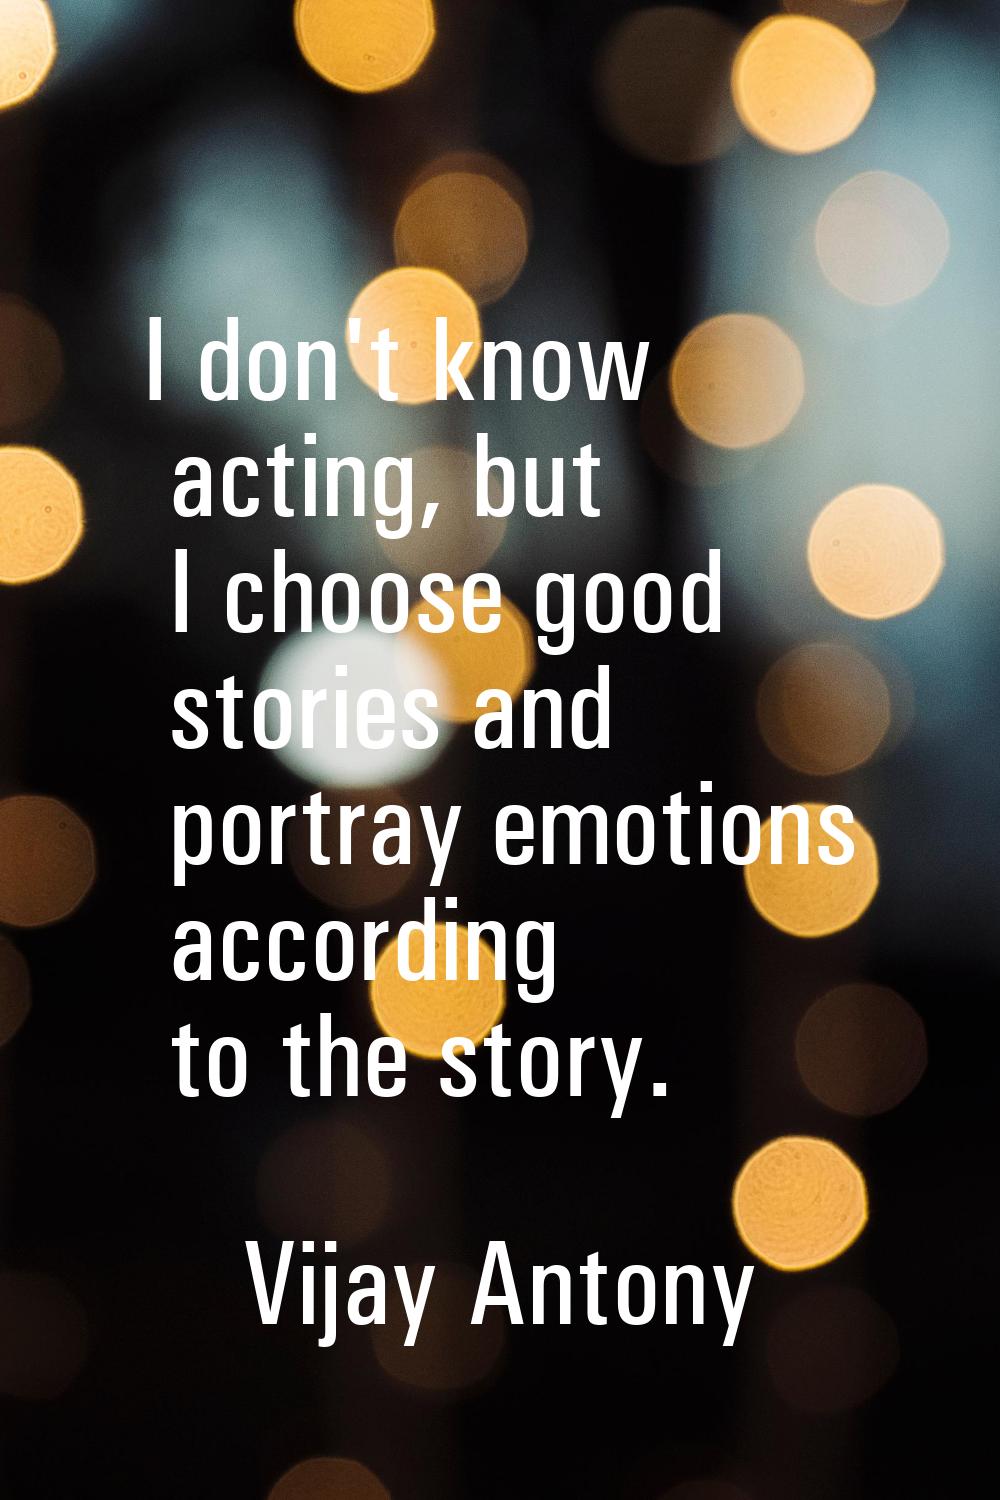 I don't know acting, but I choose good stories and portray emotions according to the story.